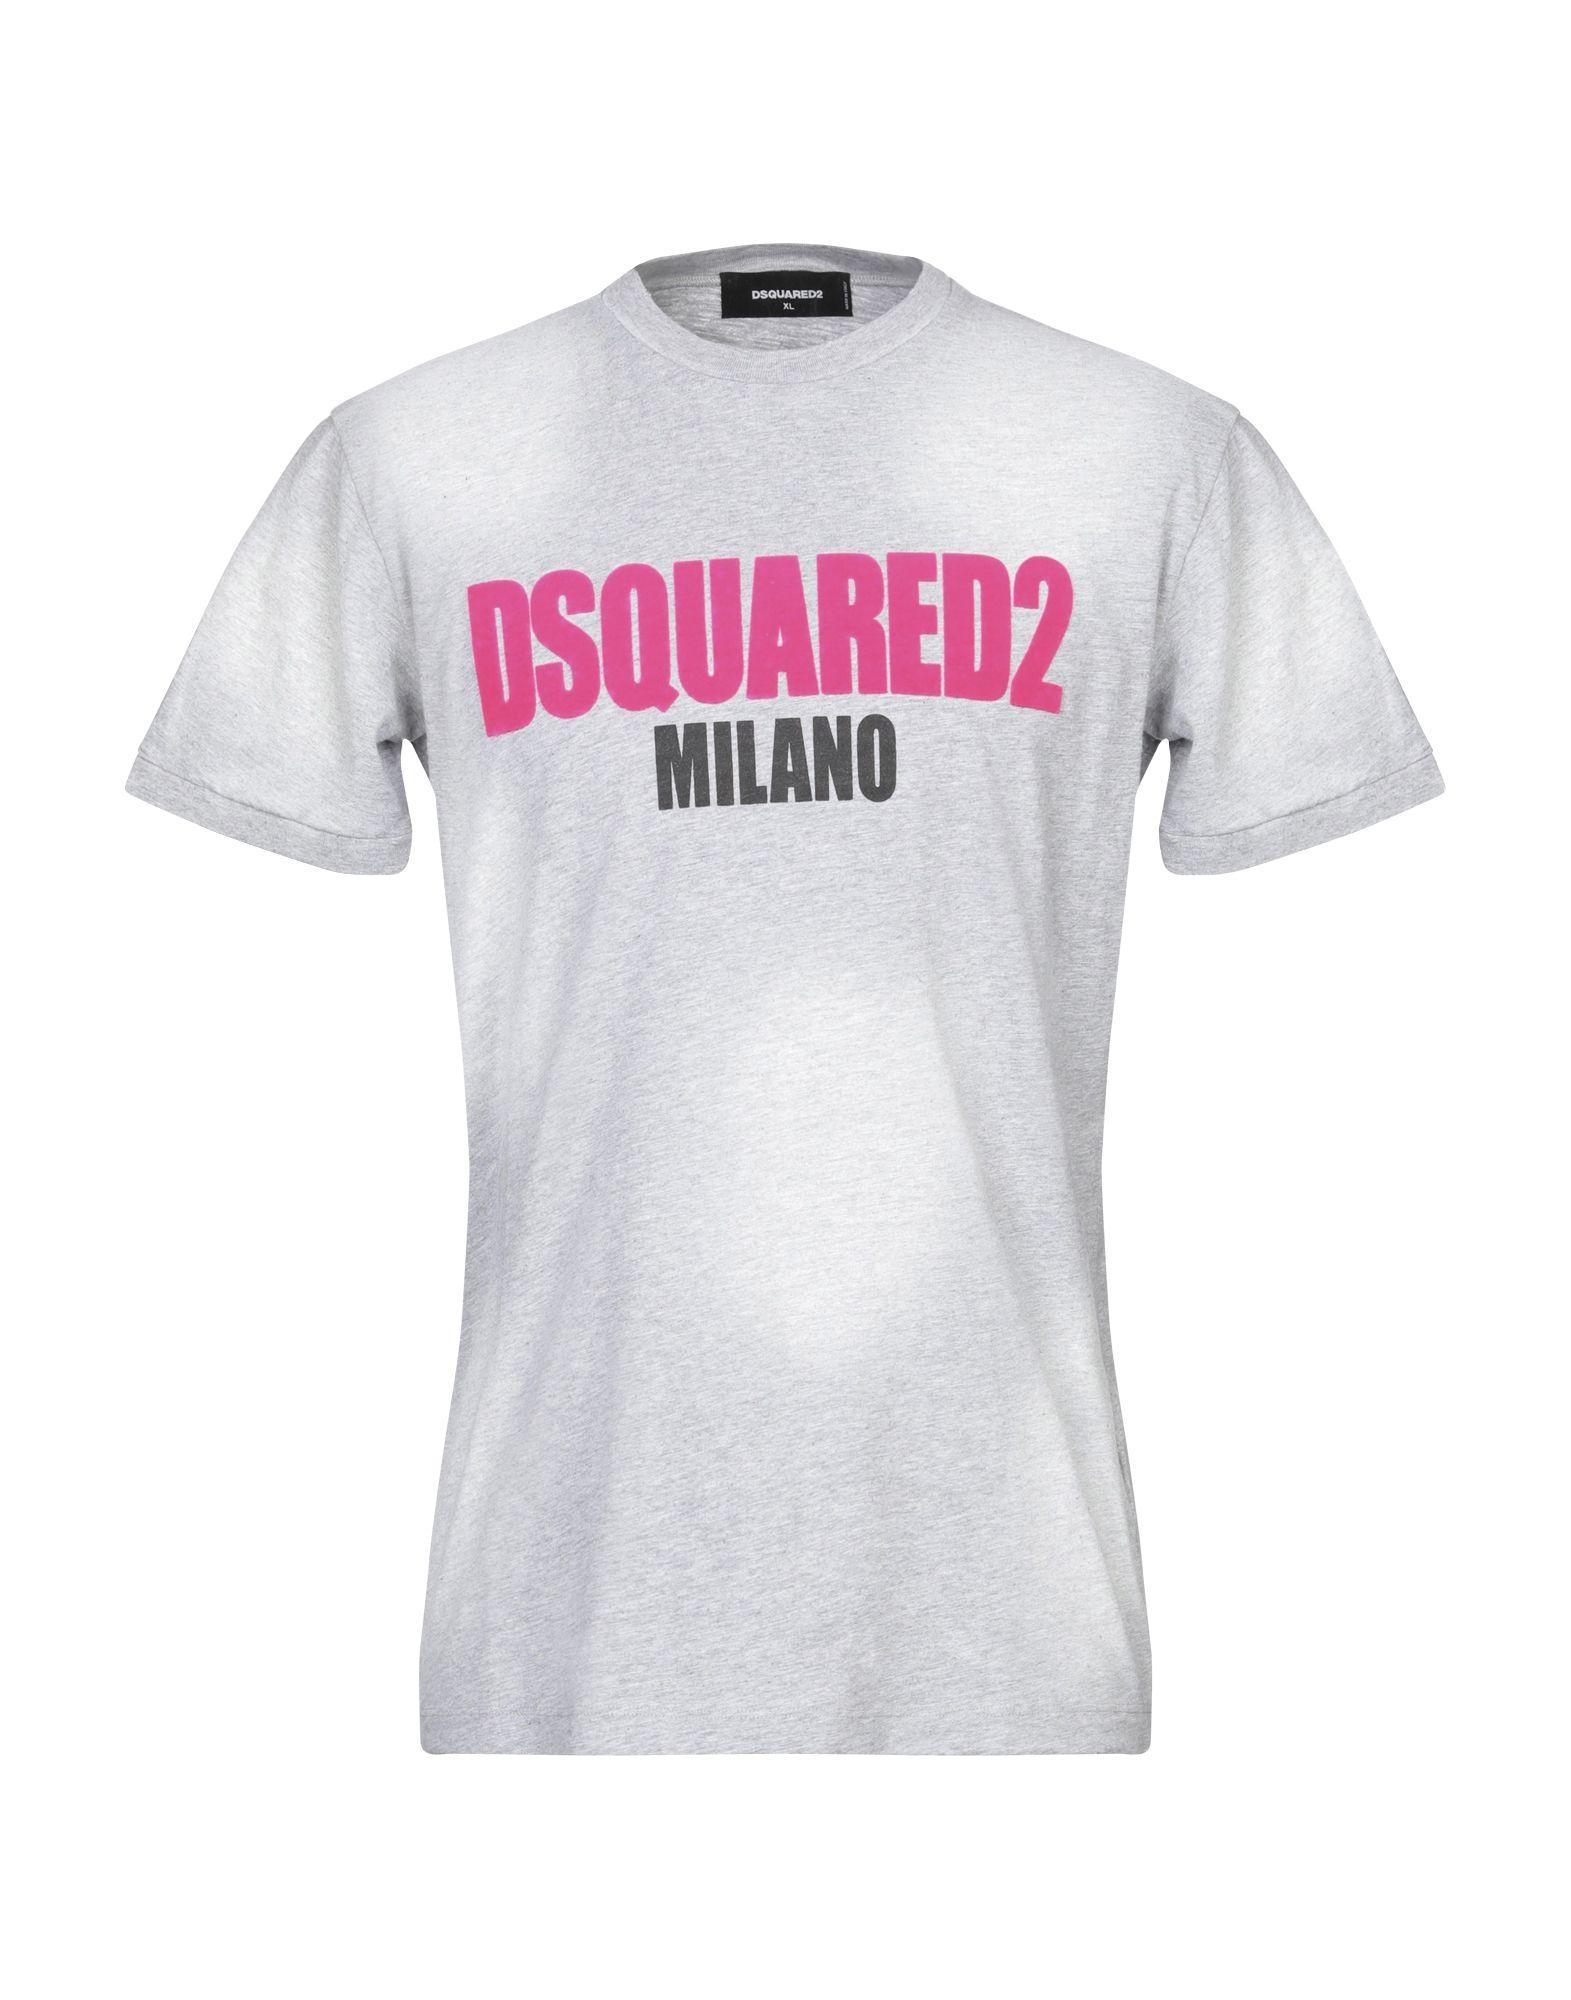 DSquared² Cotton T-shirt in Light Grey (Gray) for Men - Save 40% - Lyst